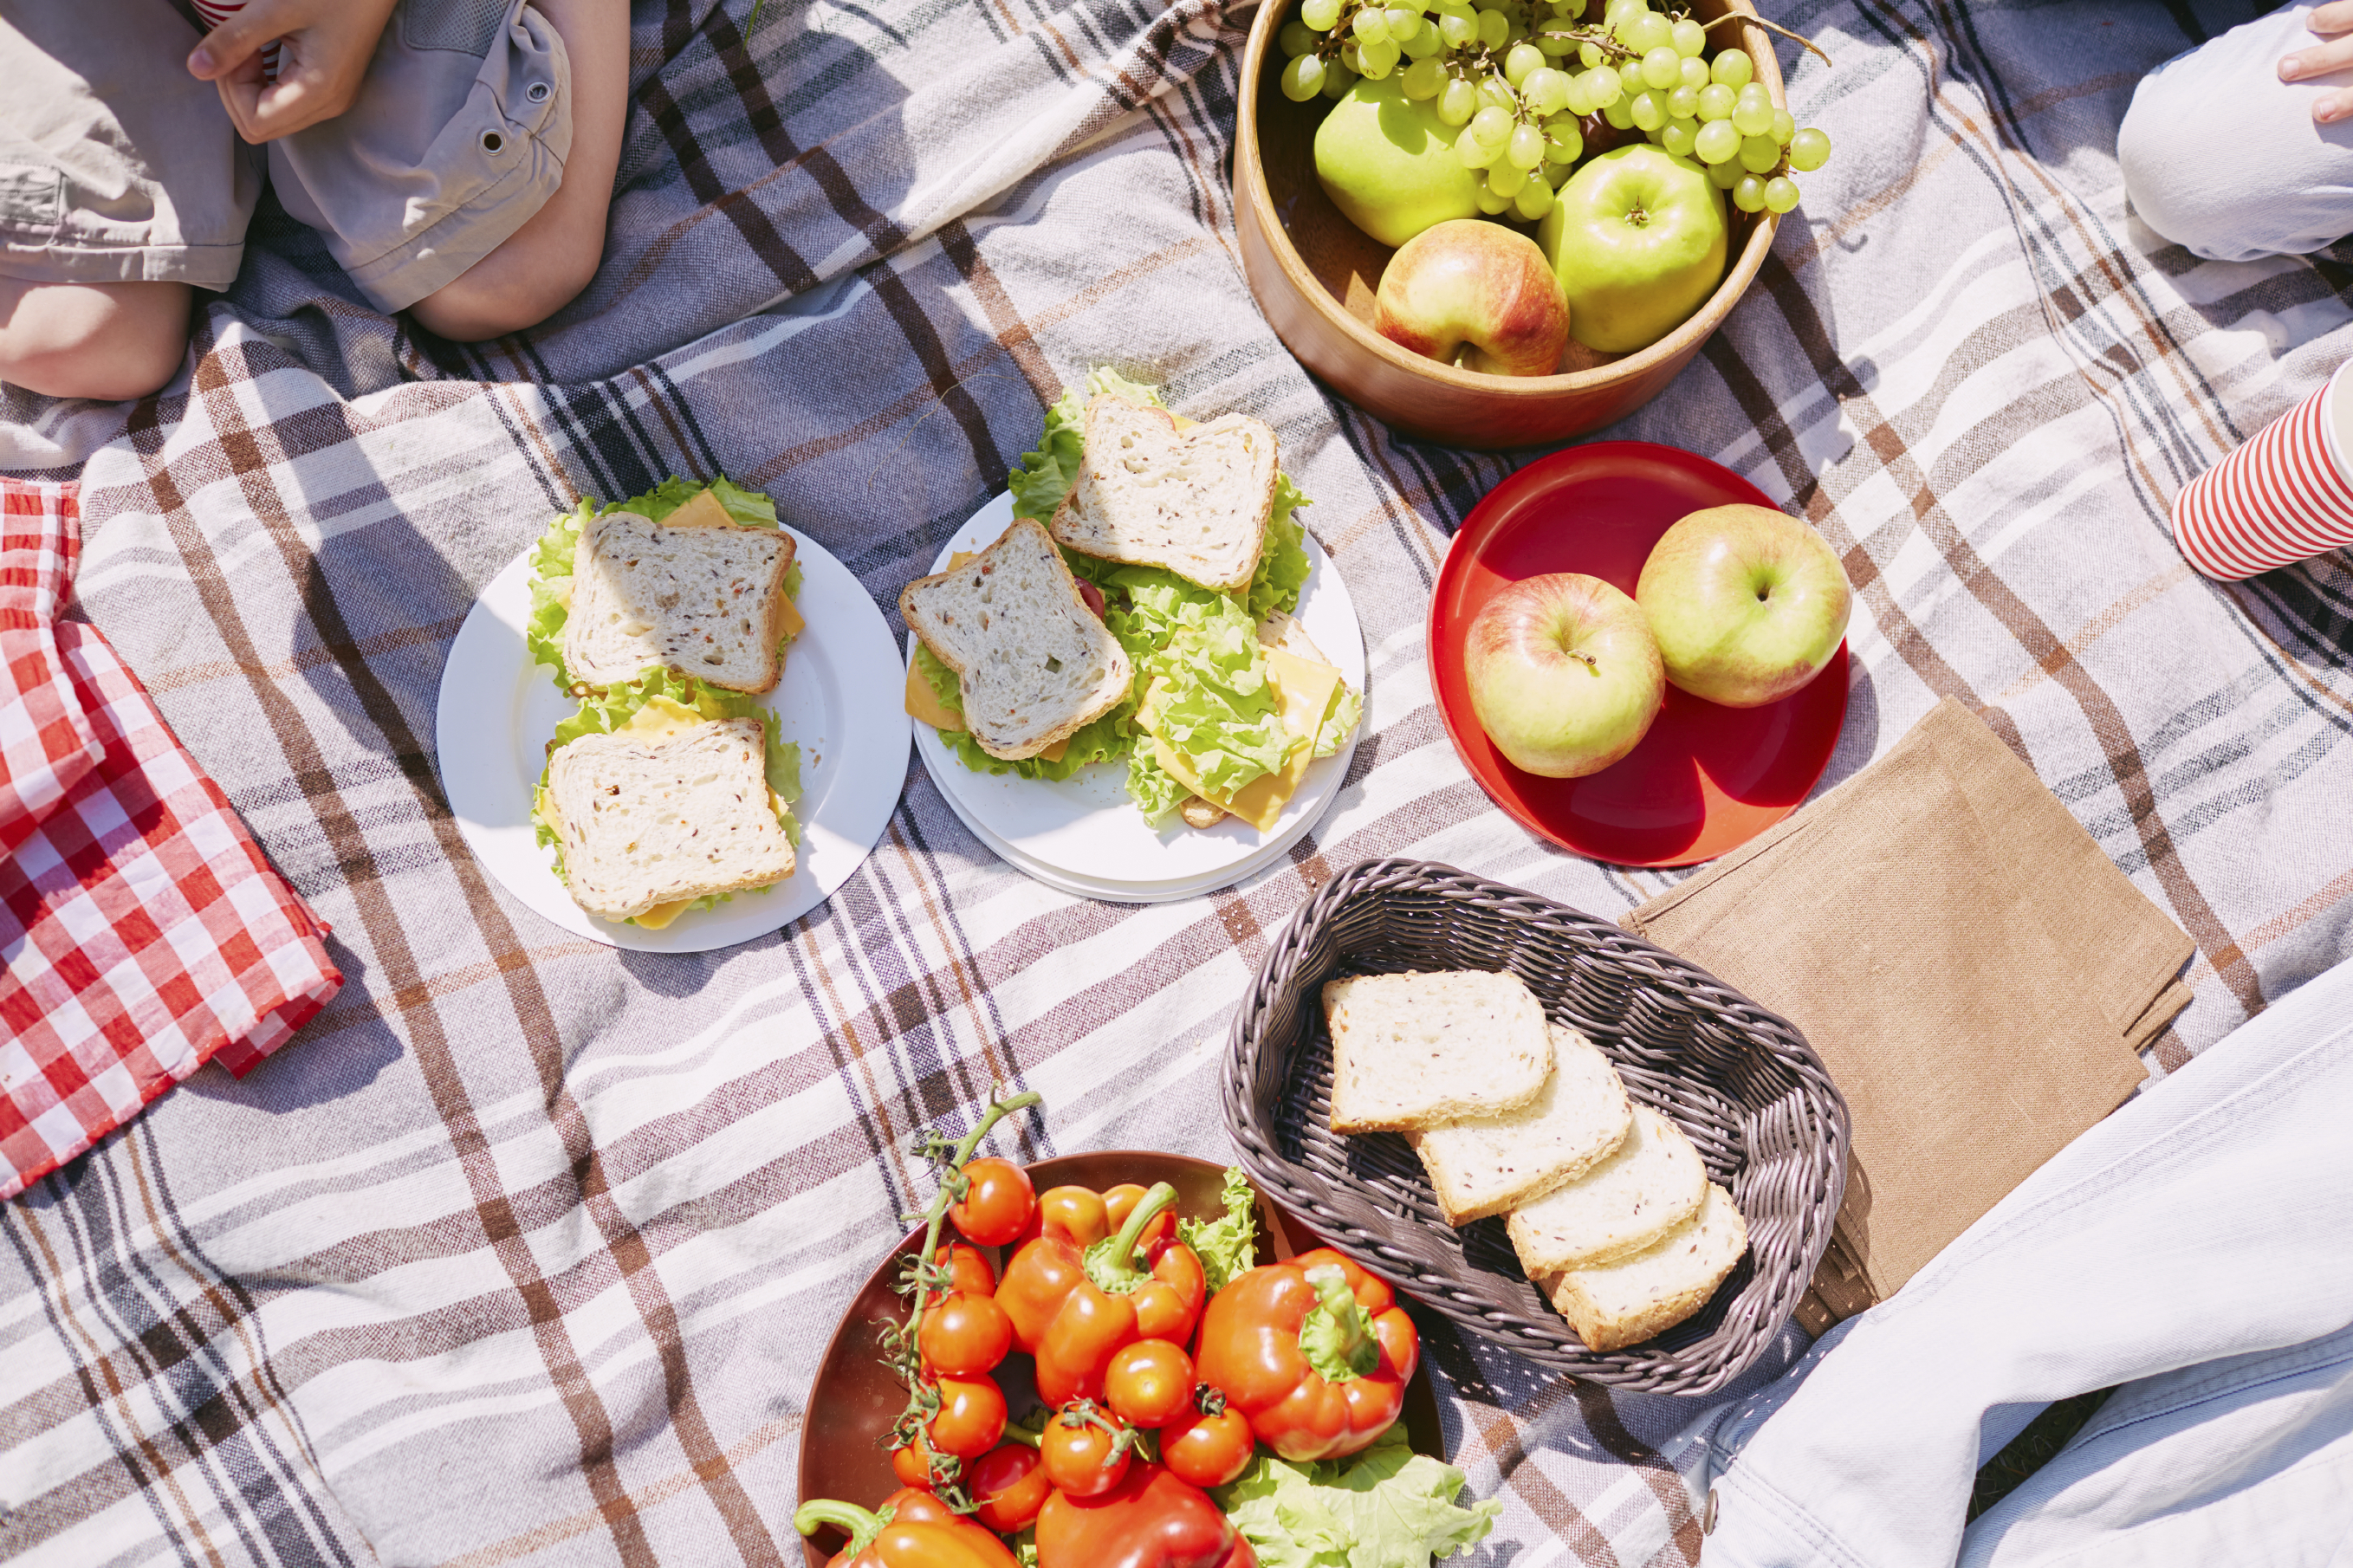 July is National Picnic Month